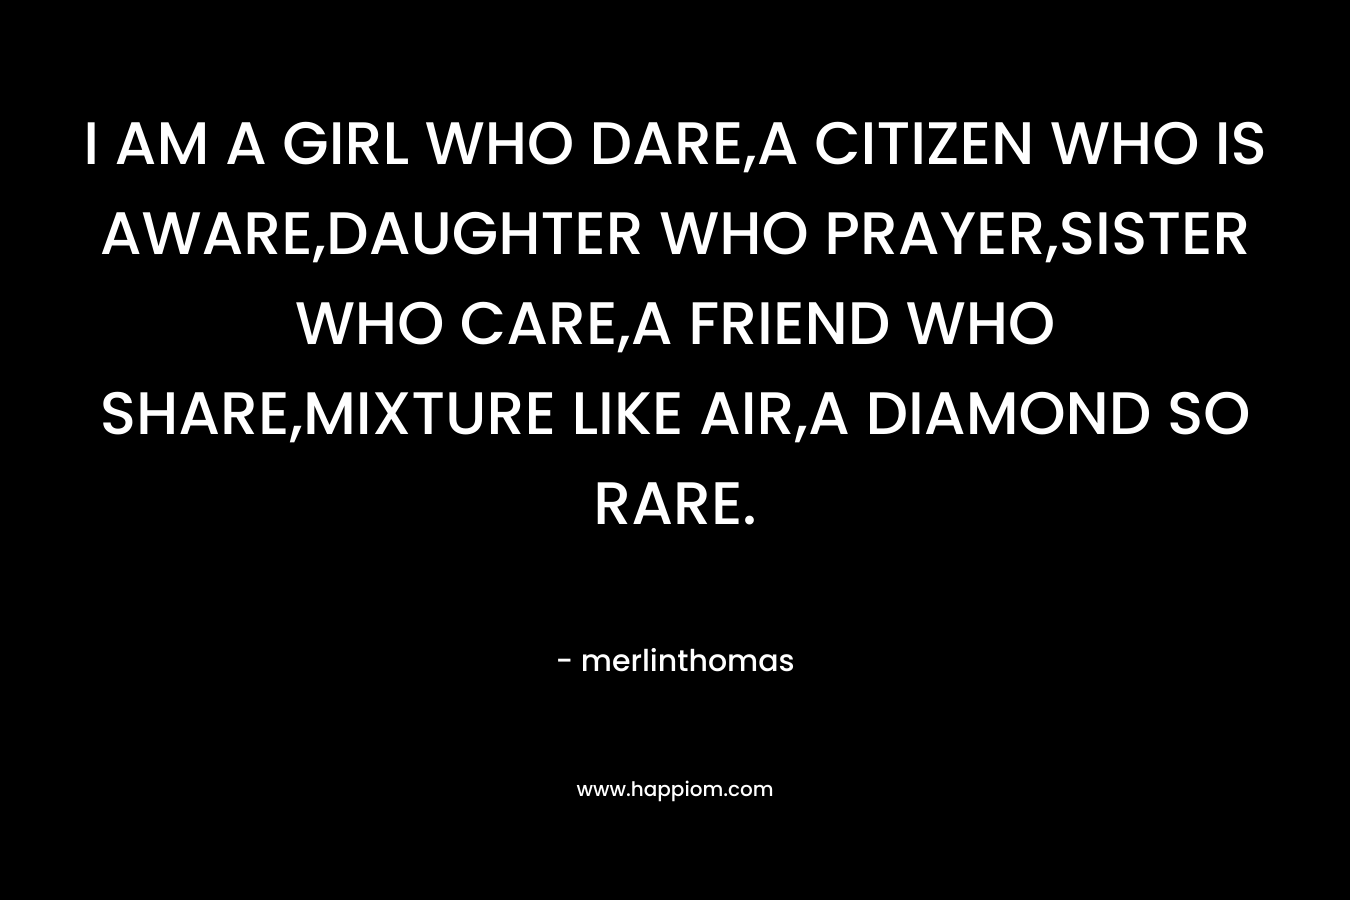 I AM A GIRL WHO DARE,A CITIZEN WHO IS AWARE,DAUGHTER WHO PRAYER,SISTER WHO CARE,A FRIEND WHO SHARE,MIXTURE LIKE AIR,A DIAMOND SO RARE.